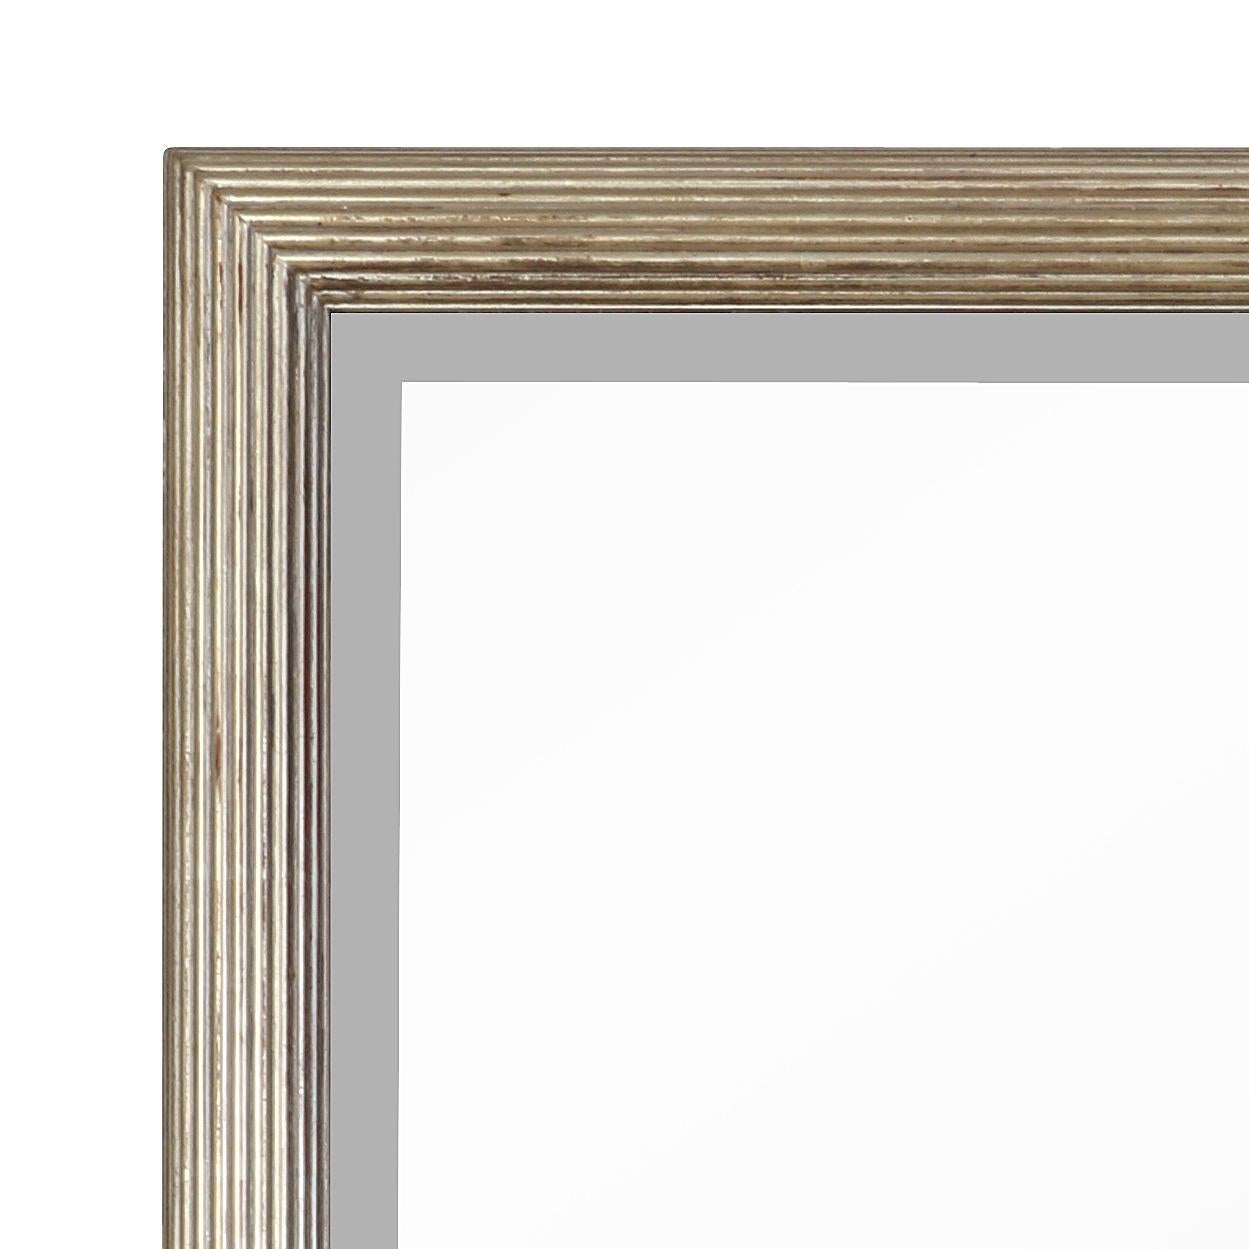 A custom silver leaf rectangular mirror with a fluted, ribbed frame.  Handsome mirror can complement a variety of room styles.